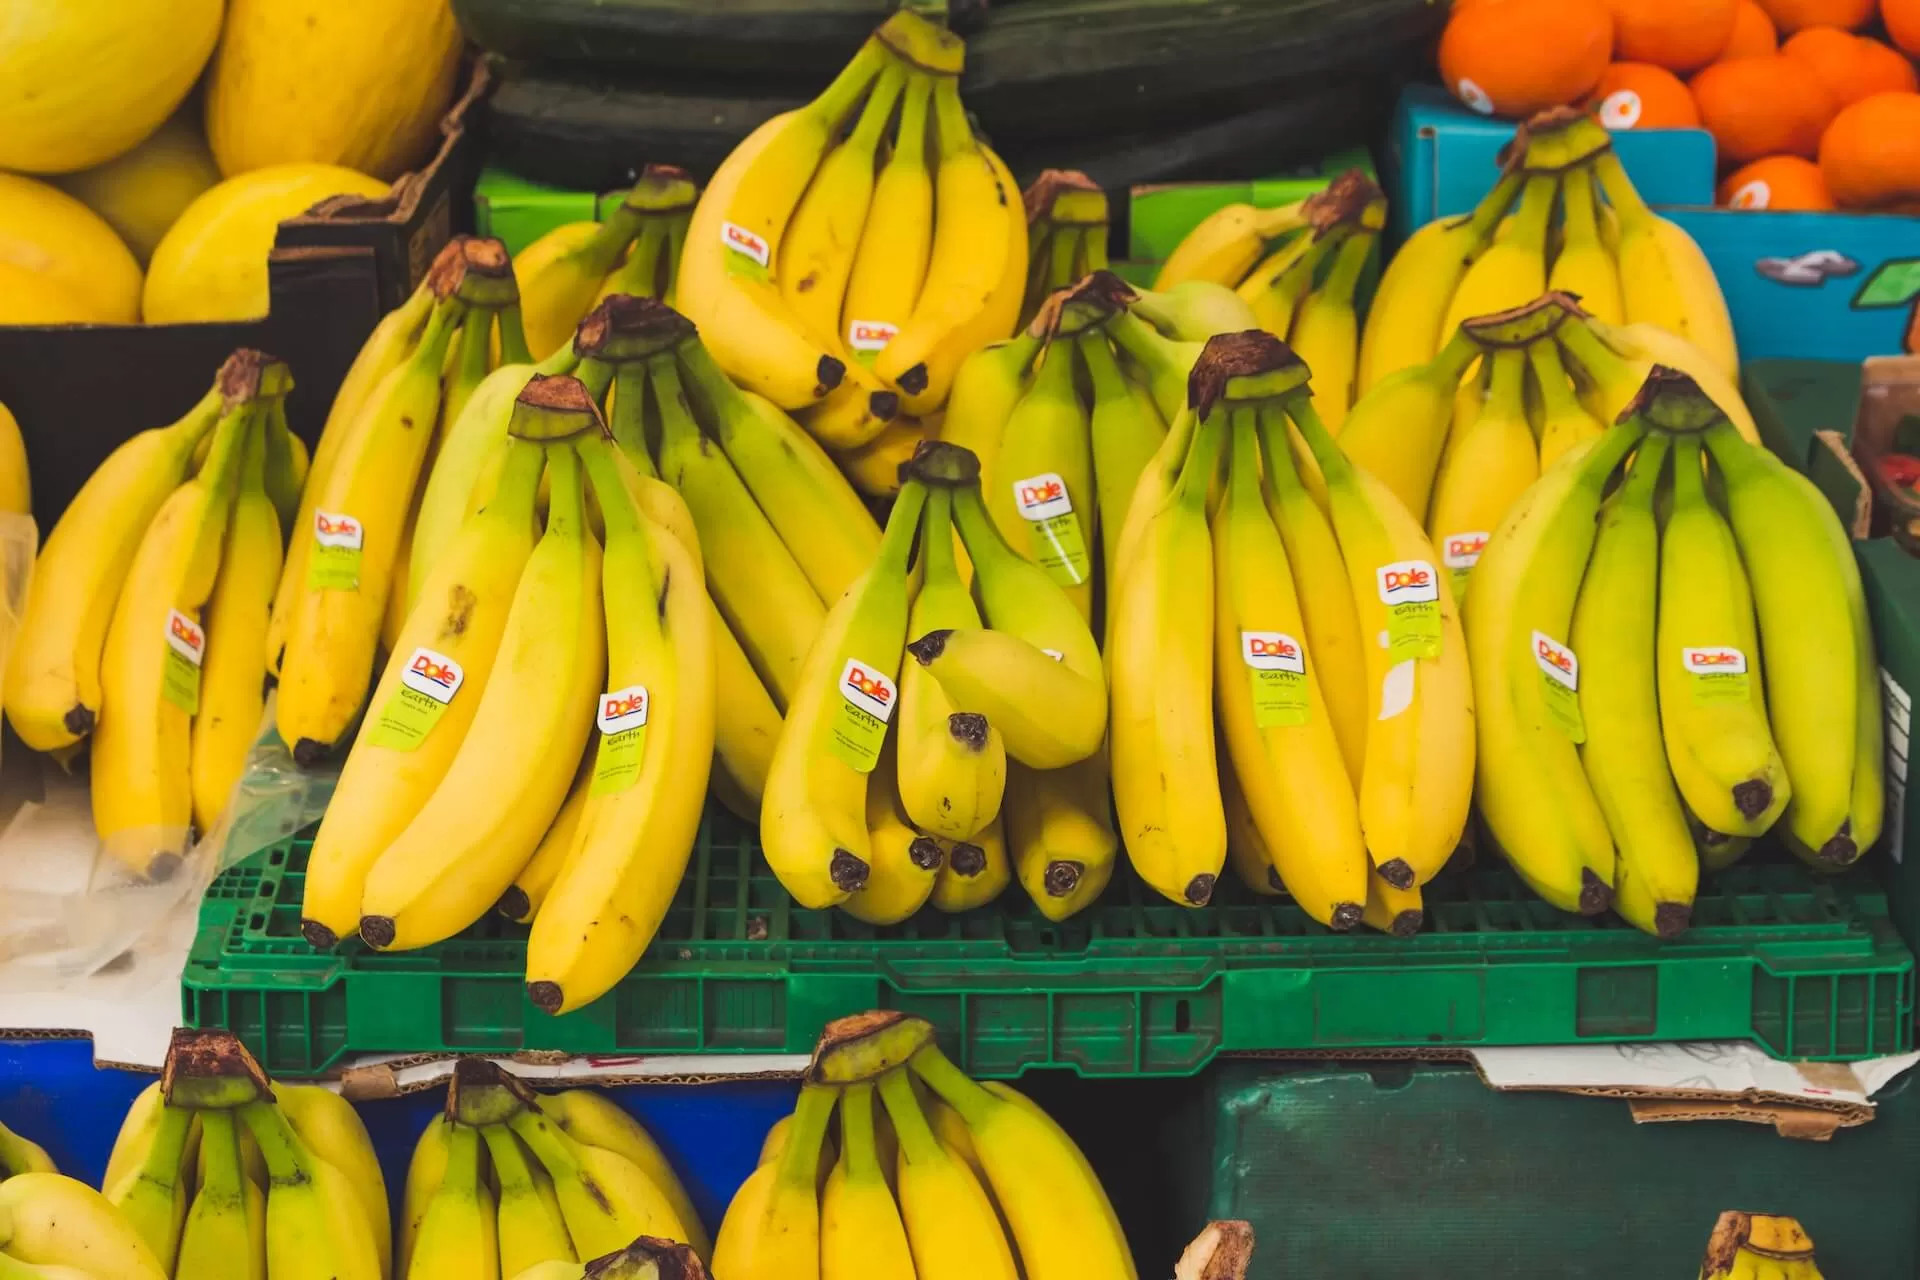 Banana benefits and side effects